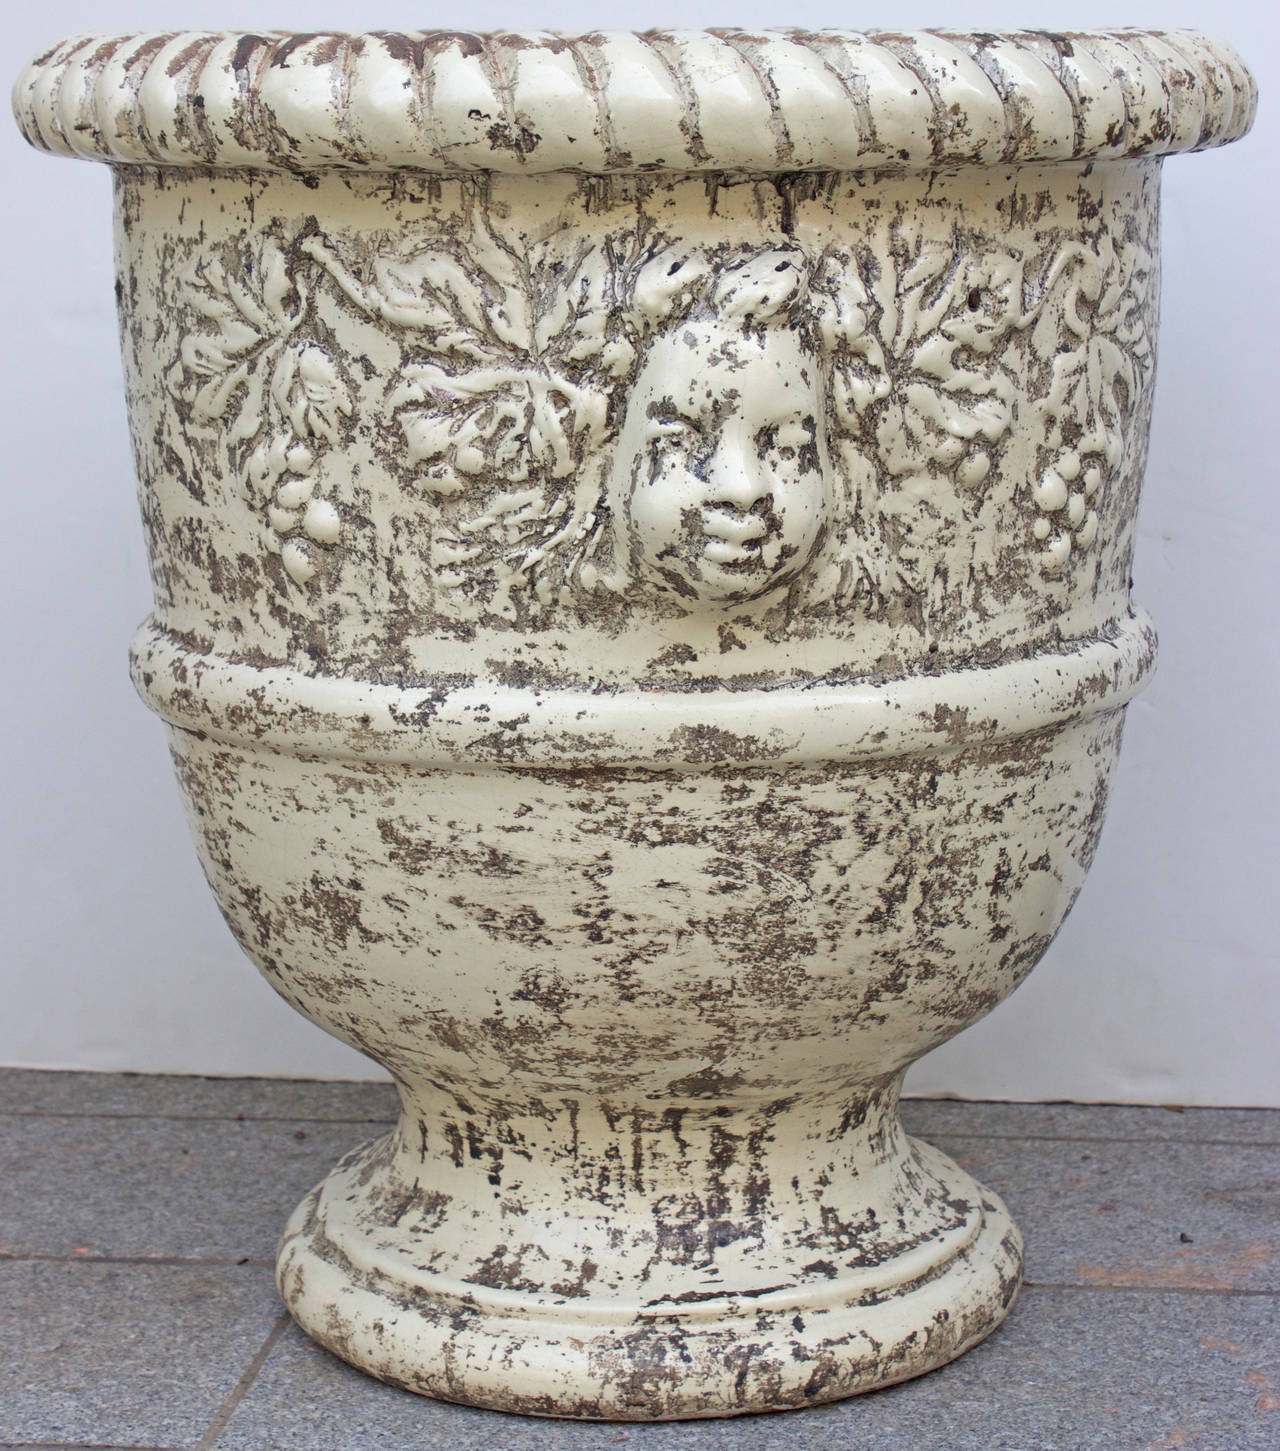 A beautiful anduze style urn, this gorgeous ceramic French Classic planter recreates the level of the 16th century French originals with medaillons and foliages details. It is Classic and timeless.
France, circa 1990.
After modelling and stamping